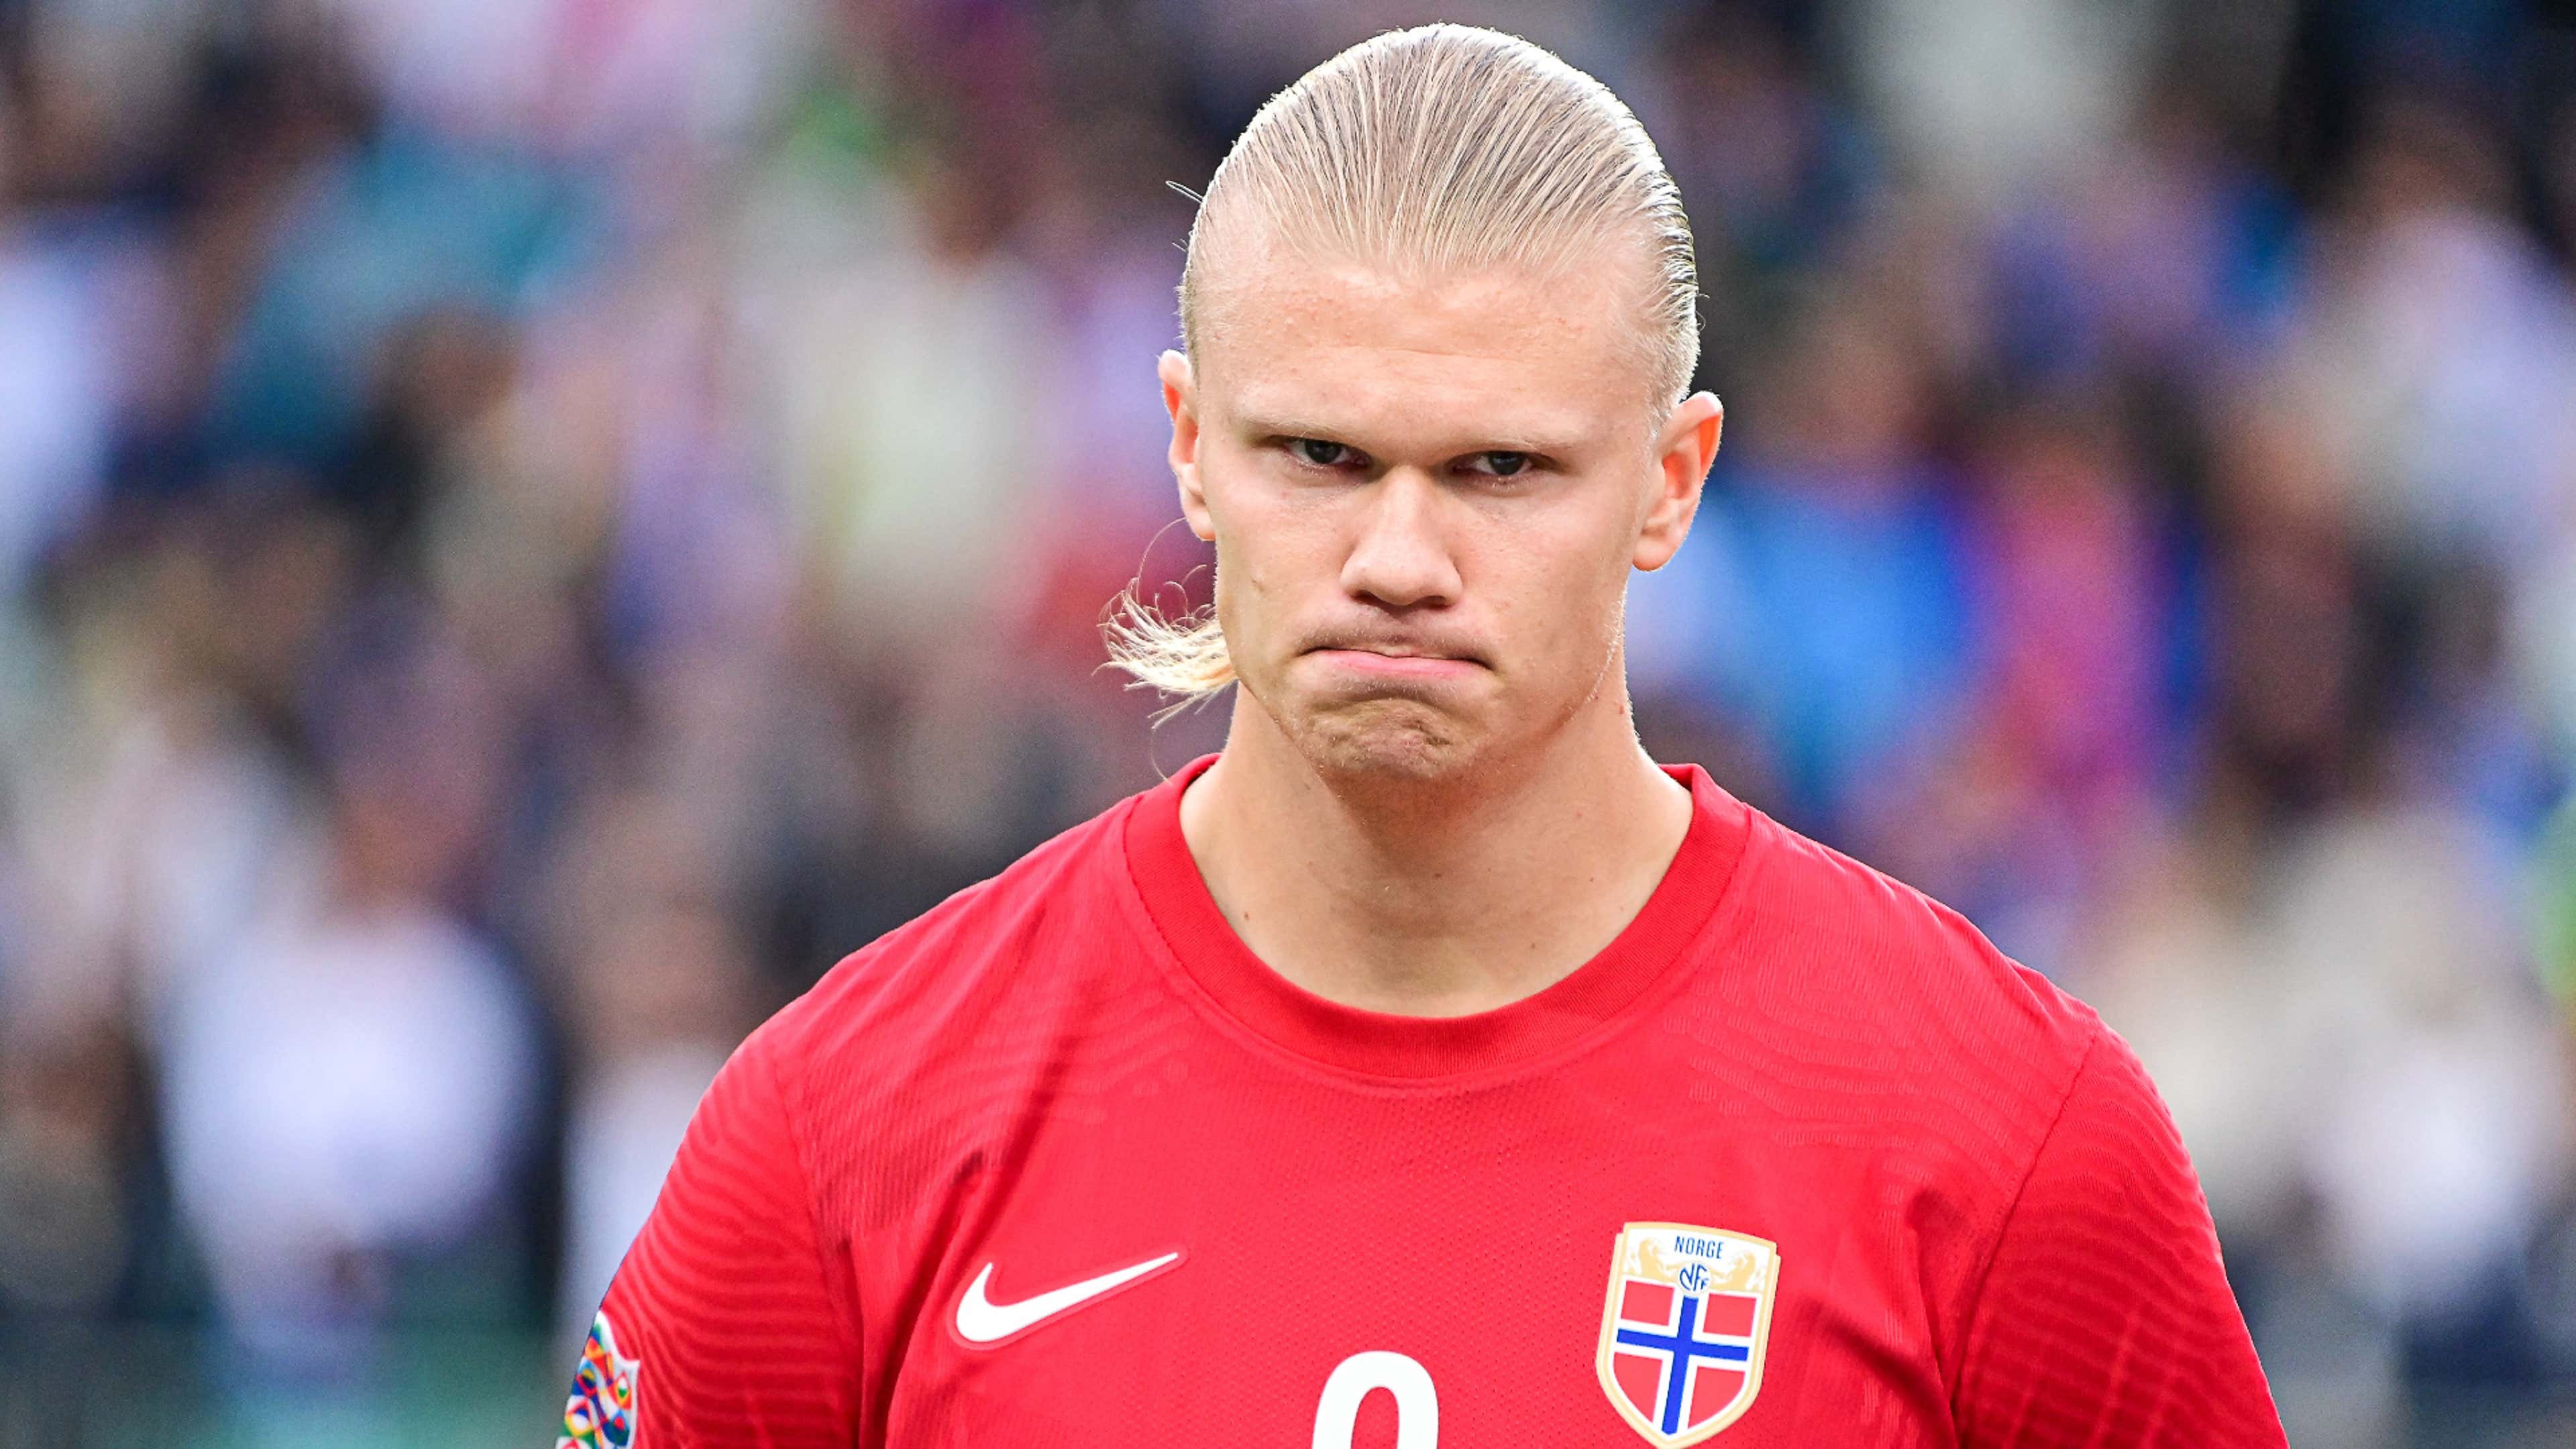 Where was Erling Haaland born and why does he not play for England?